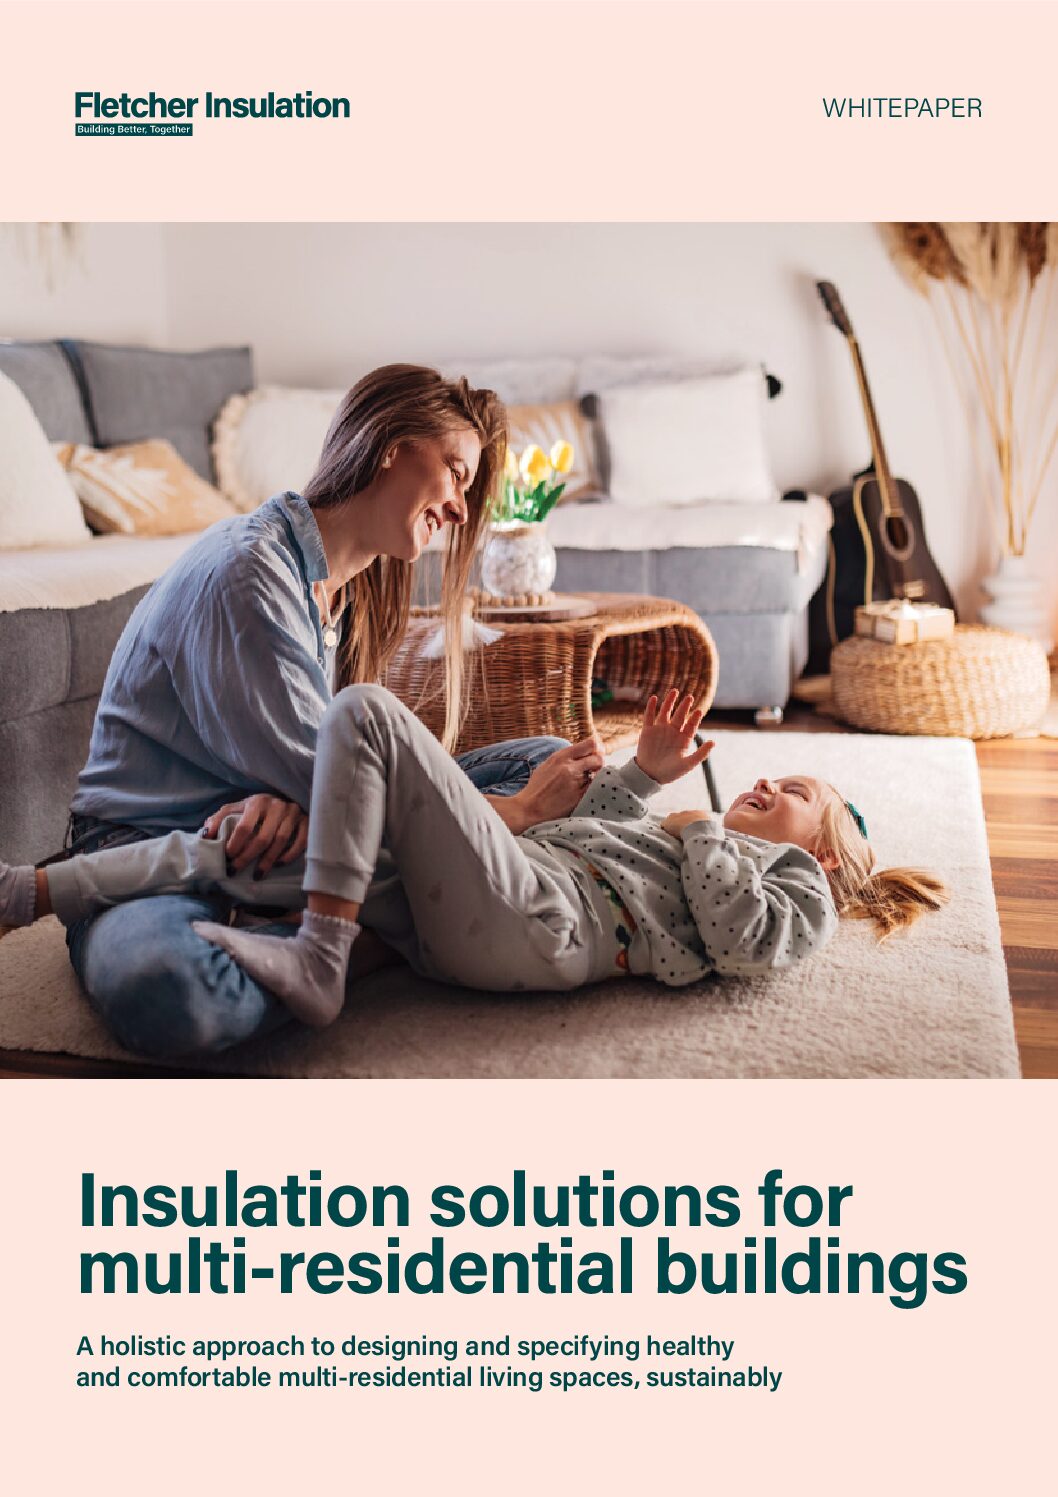 Whitepaper – Insulation Solutions for Multi-residential building